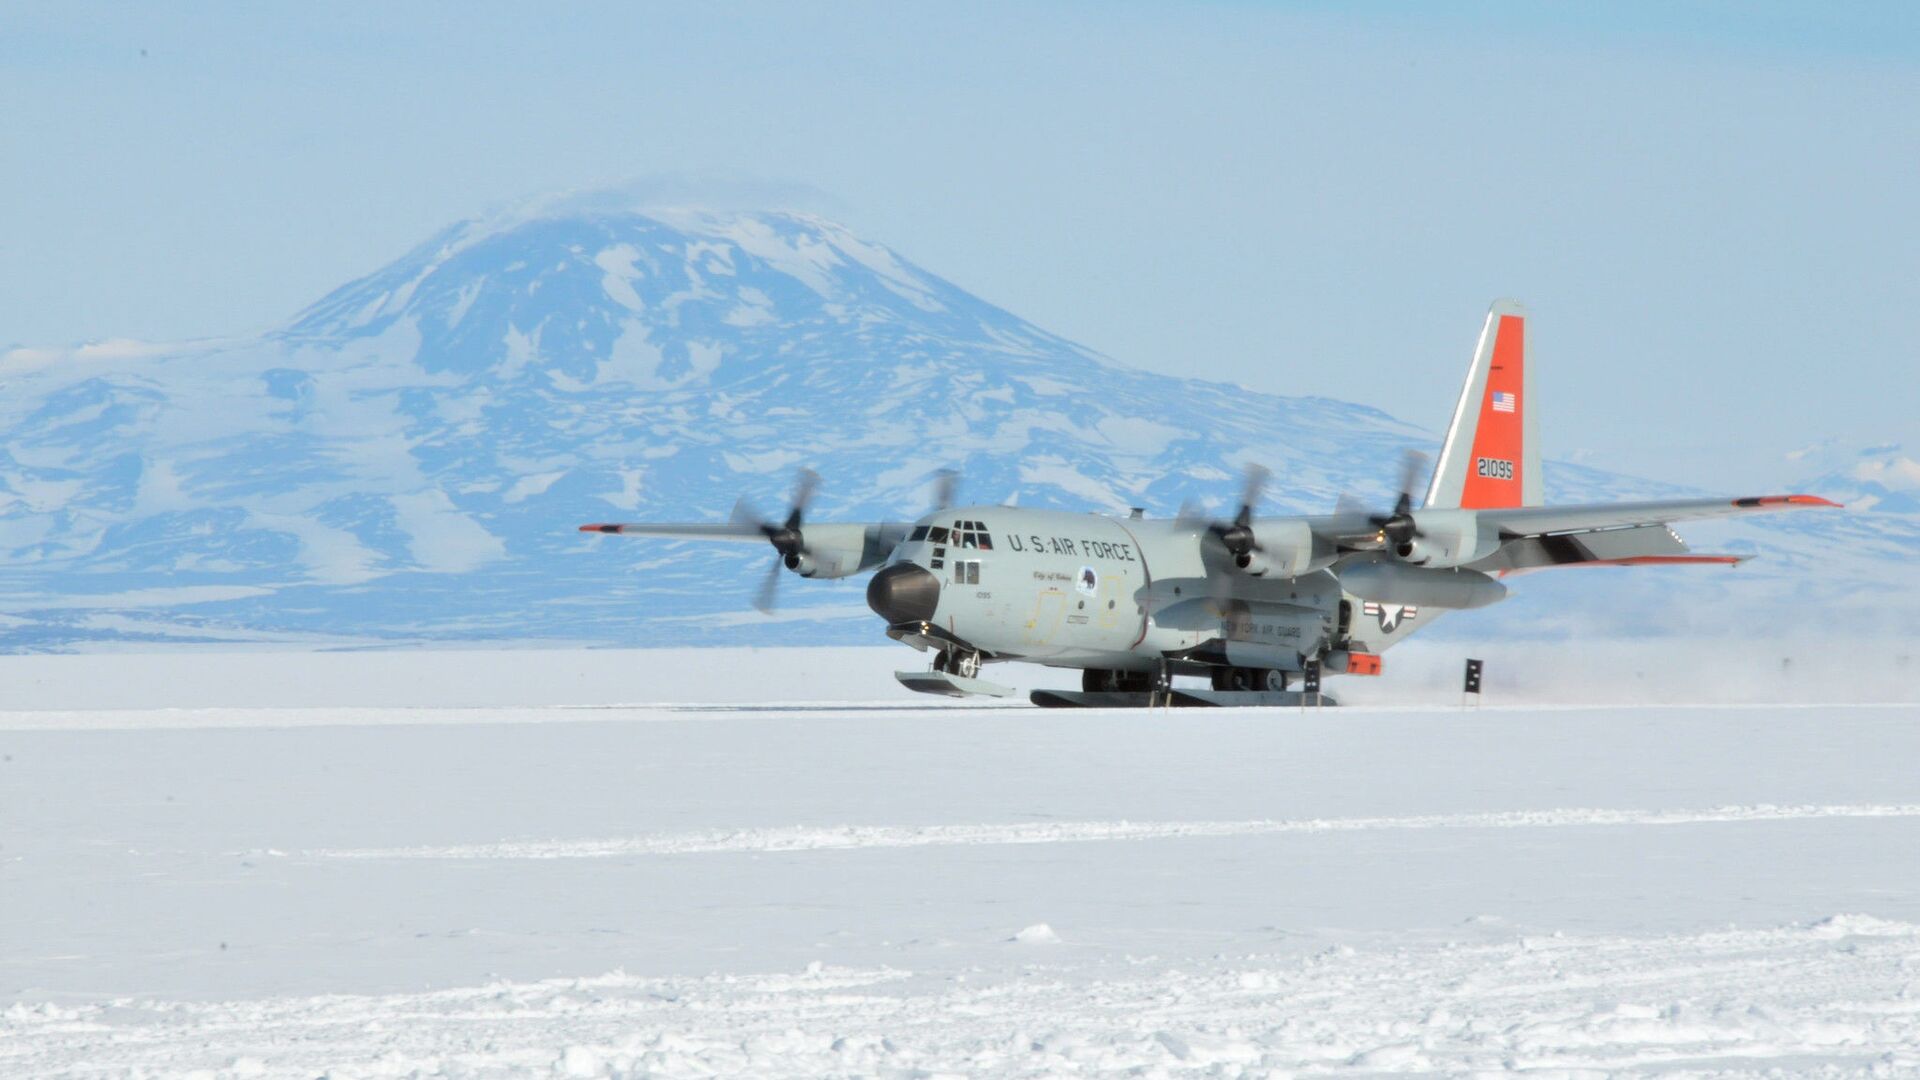 An LC-130 Skibird from the New York Air National Guard's 109th Airlift Wing in Scoita, New York, at Camp Raven, Greenland, on June 28, 2016 - Sputnik International, 1920, 23.05.2022